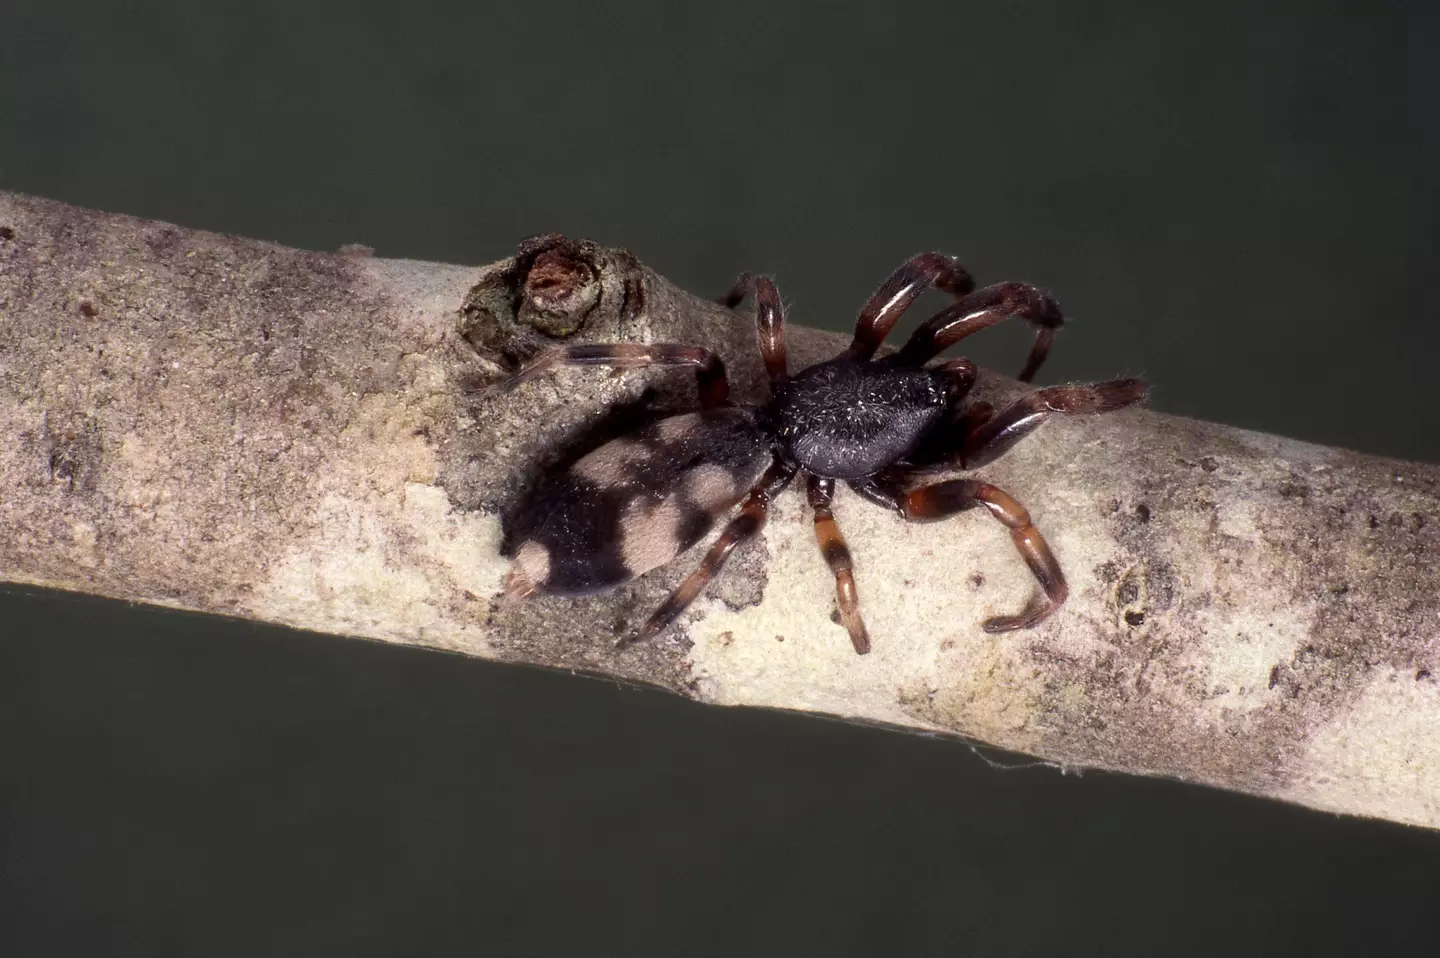 White-tailed spider bites are usually believed to be harmless.